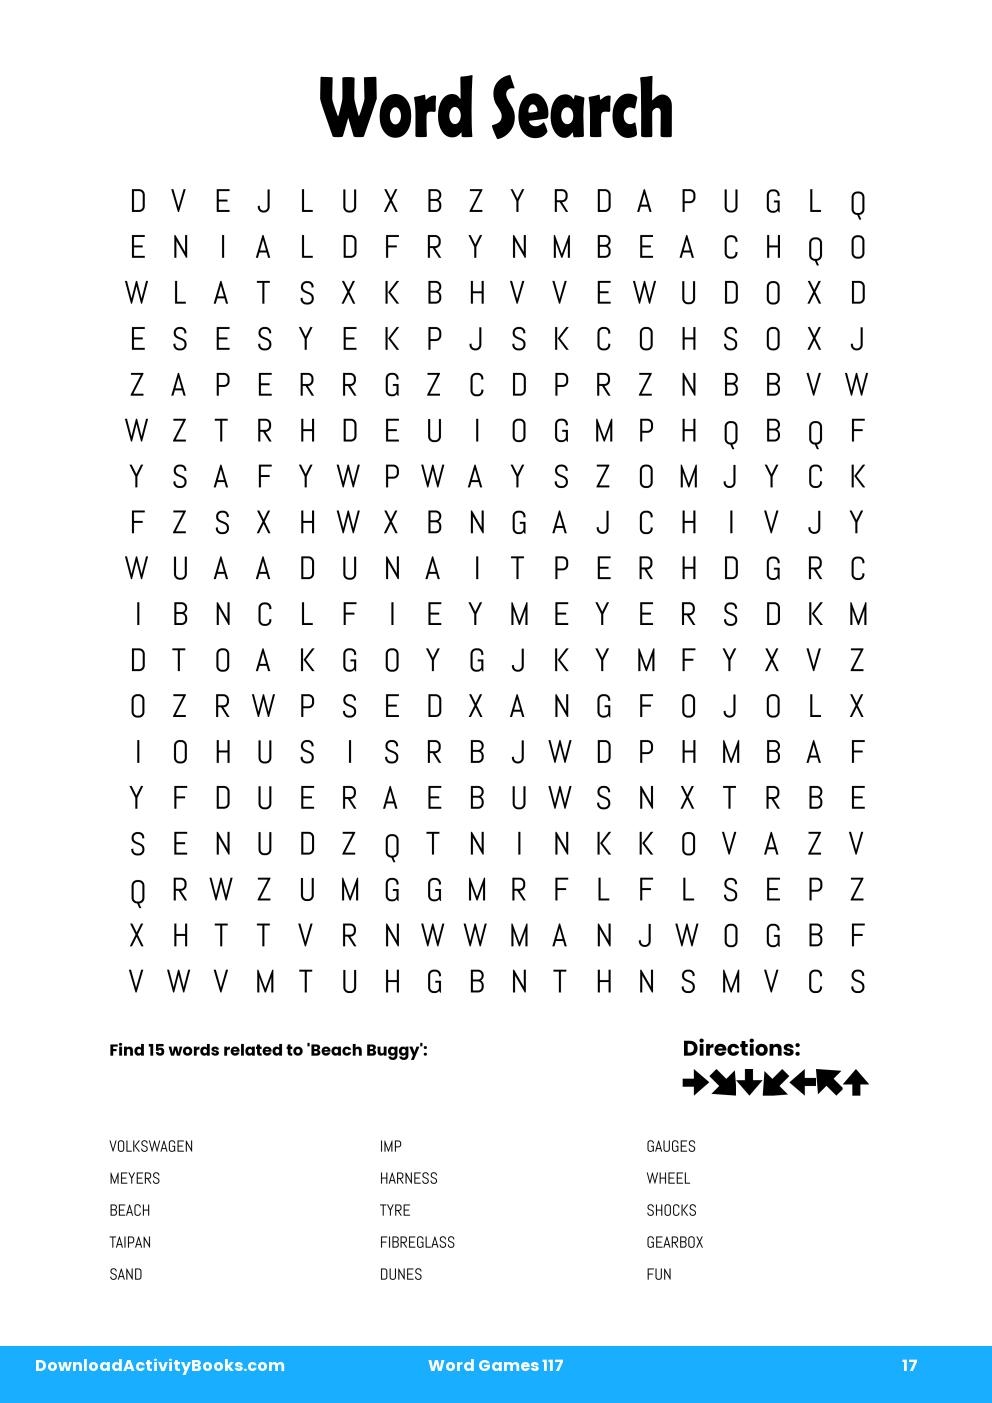 Word Search in Word Games 117